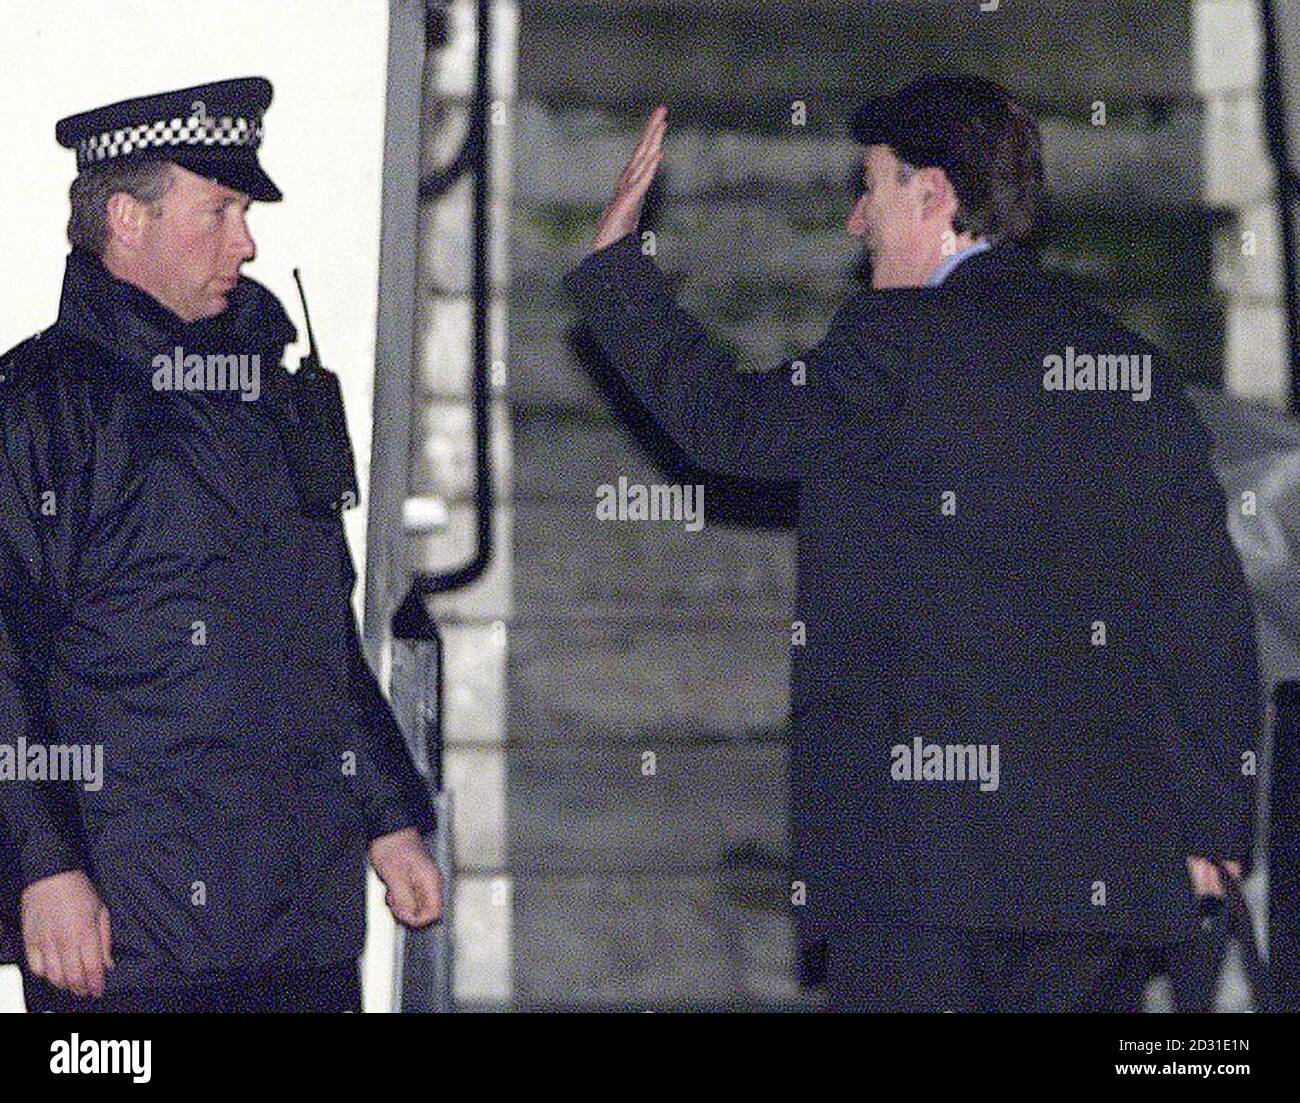 Former Northern Ireland Secretary Peter Mandelson arrives at his London home. Mr Mandelson resigned from the cabinet on Wednesday 24/01/01, following a row about a passport application from a wealthy Indian businessman. Stock Photo